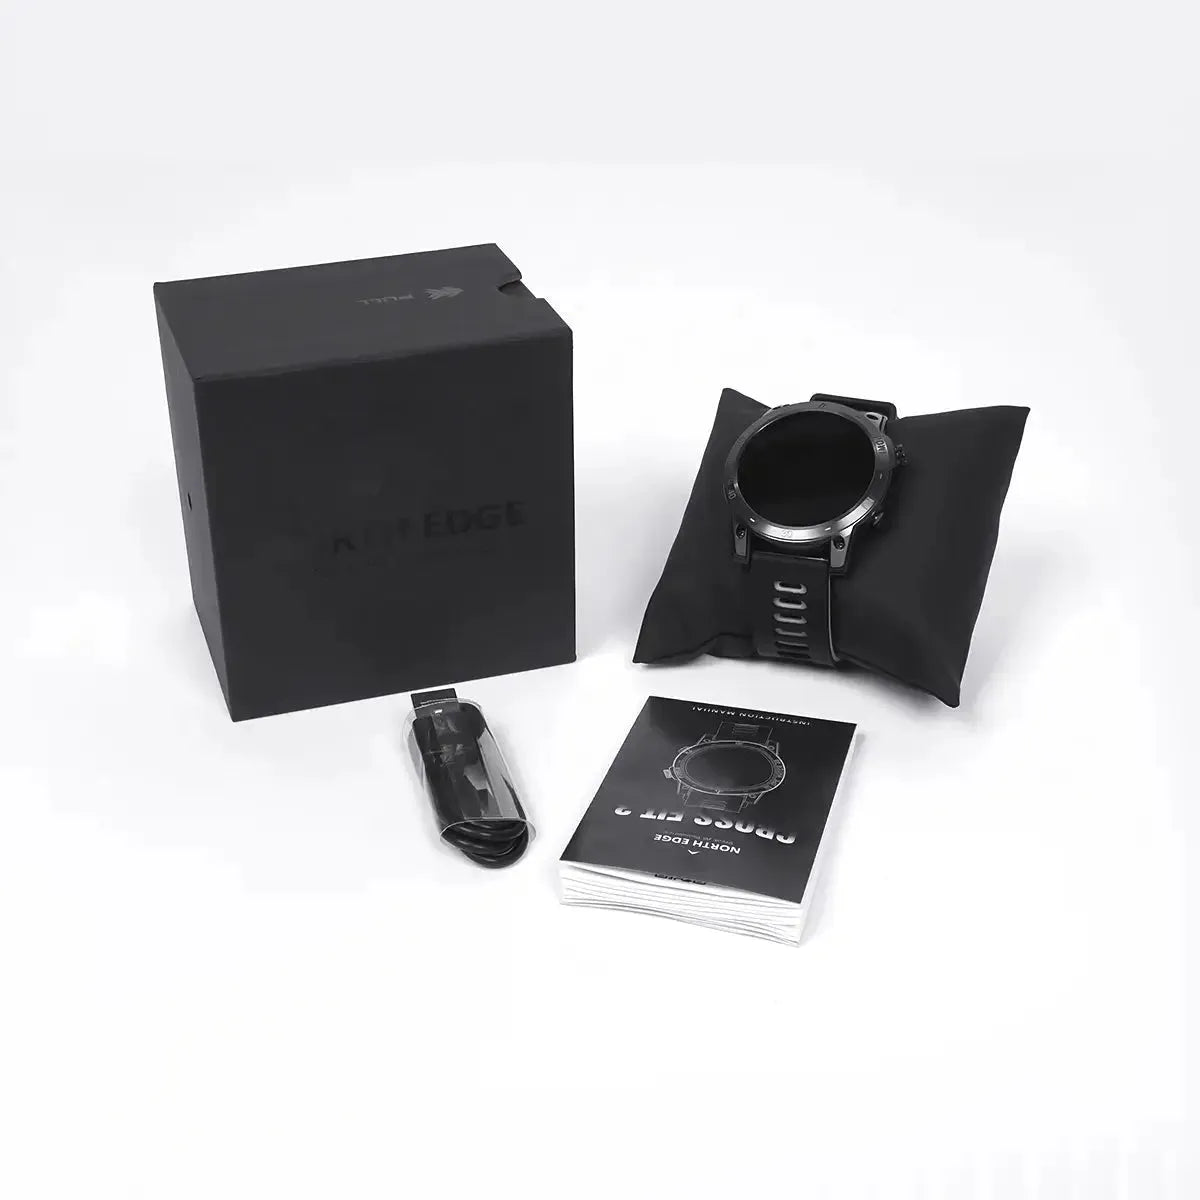 Tousains smartwatch S2 in the box